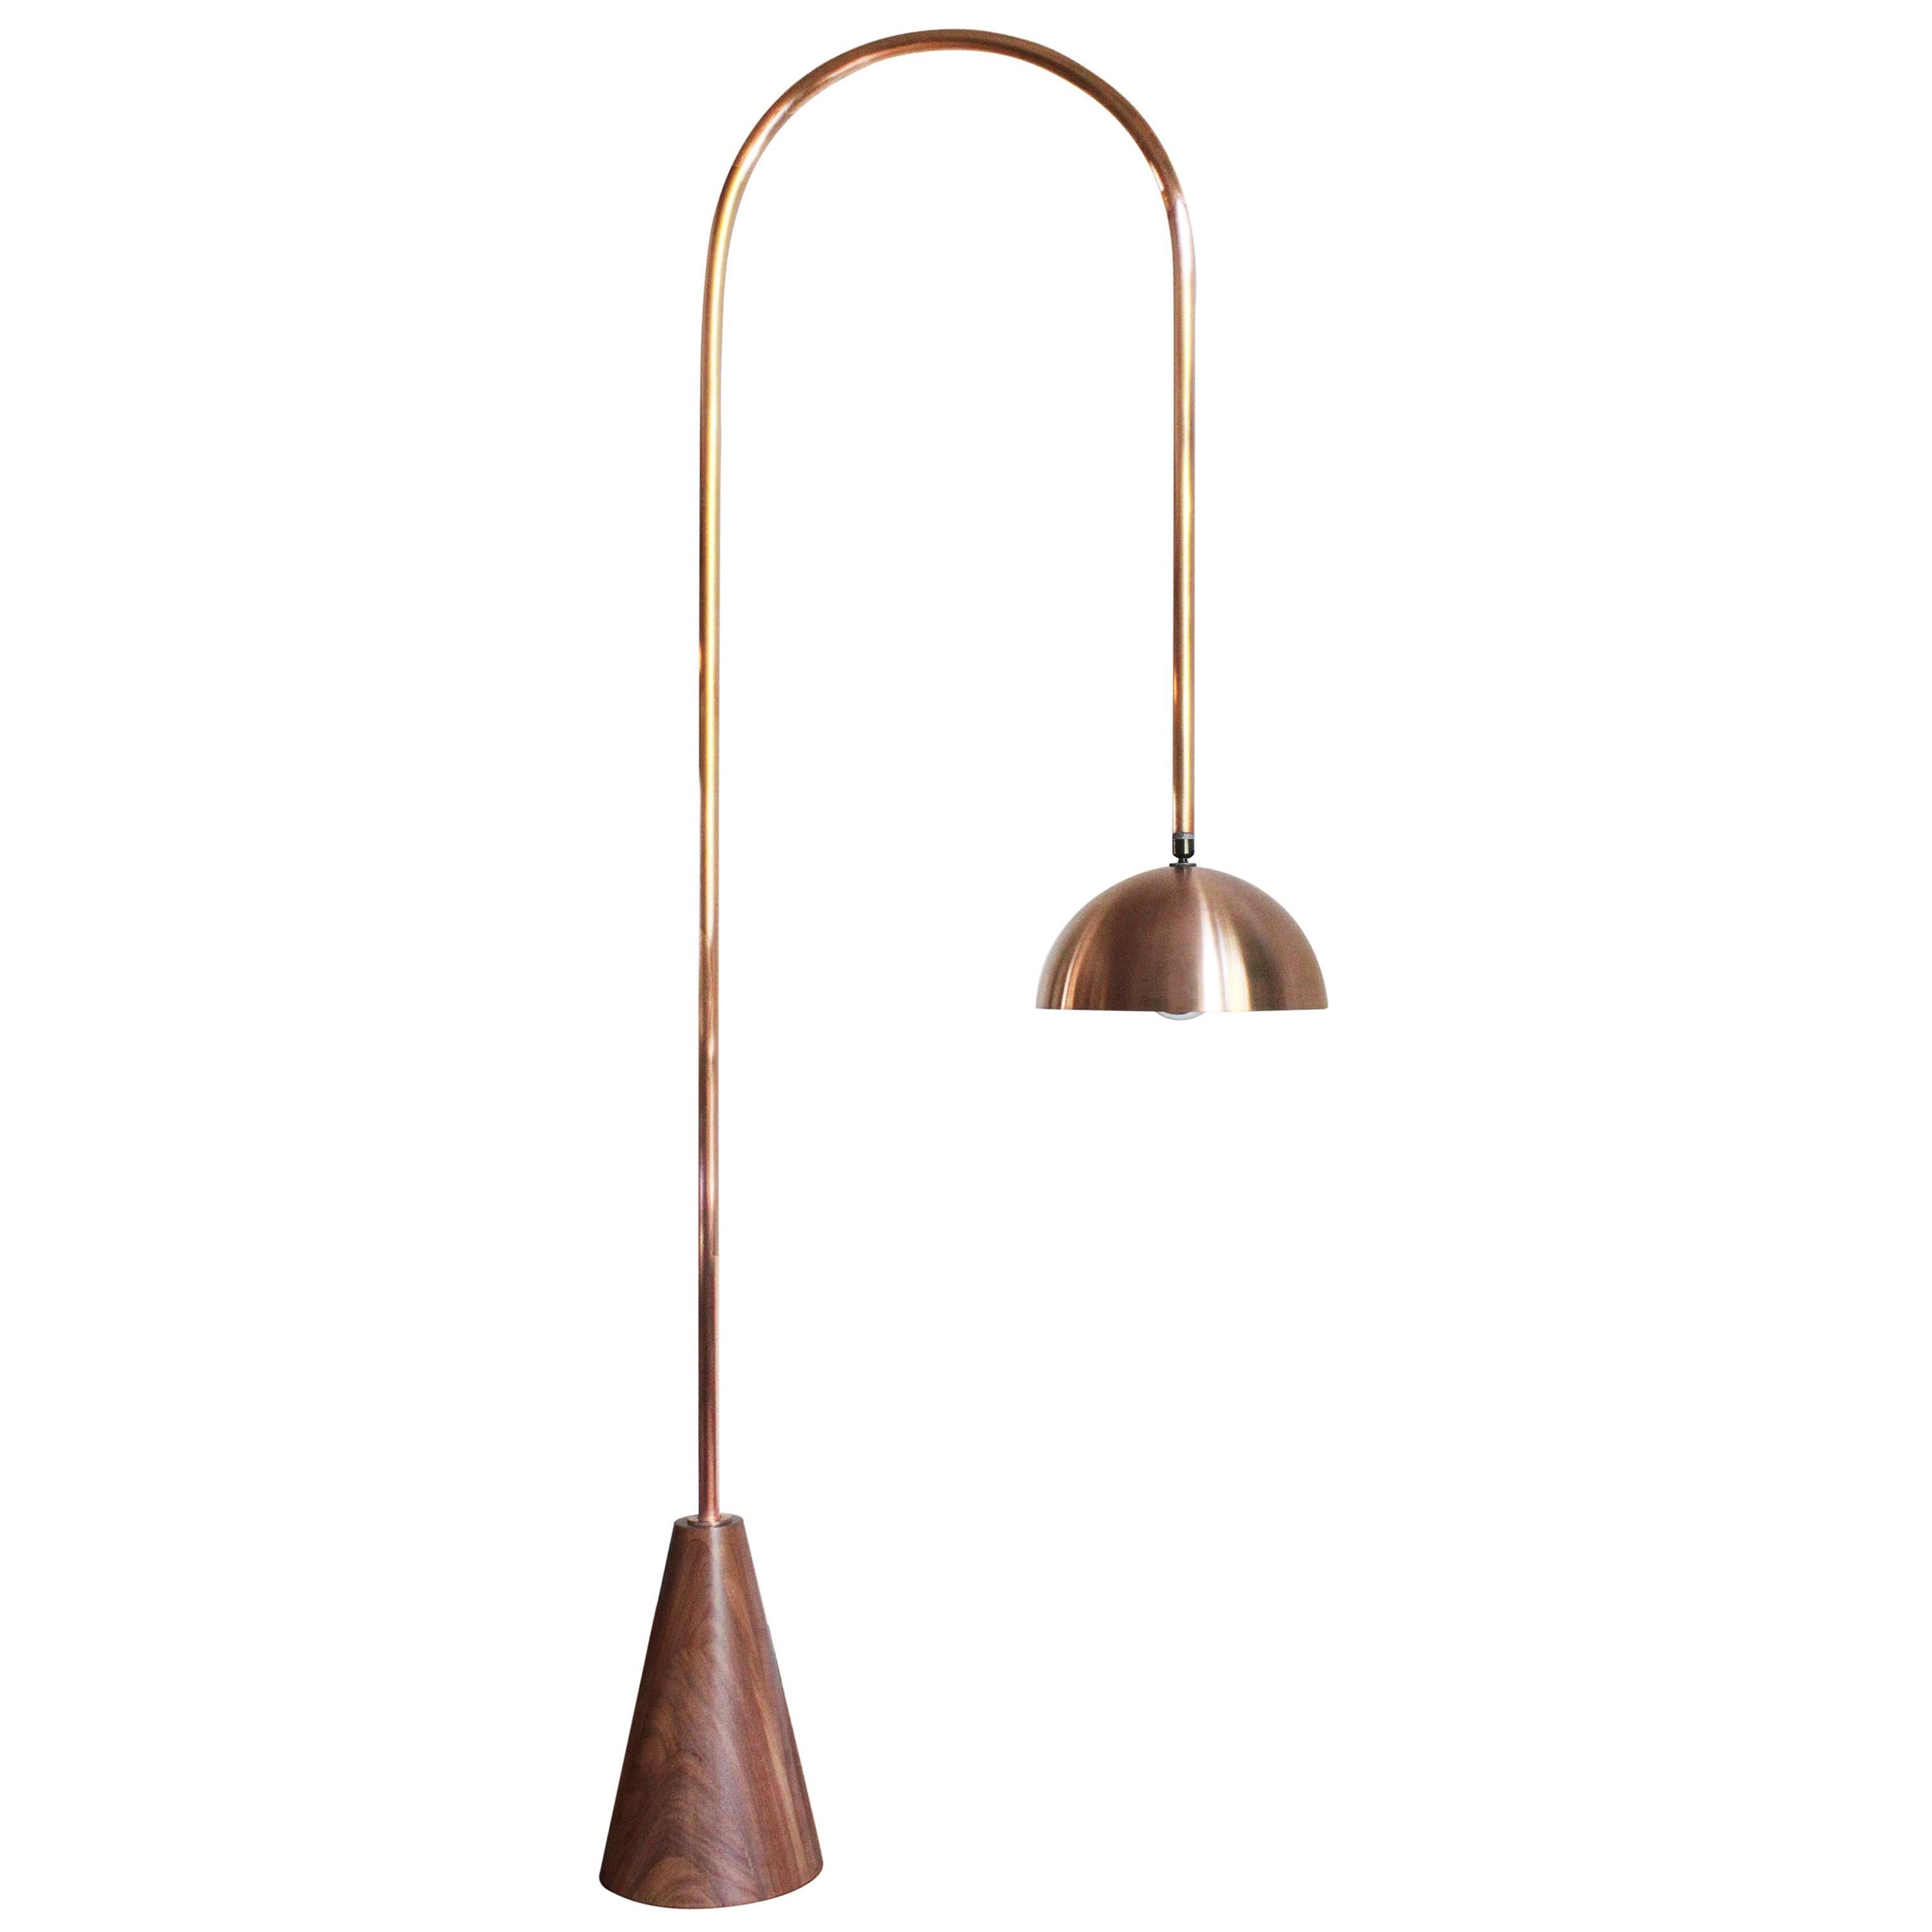 Arco De Pie Floor Lamp by Maria Beckmann, Represented by Tuleste Factory